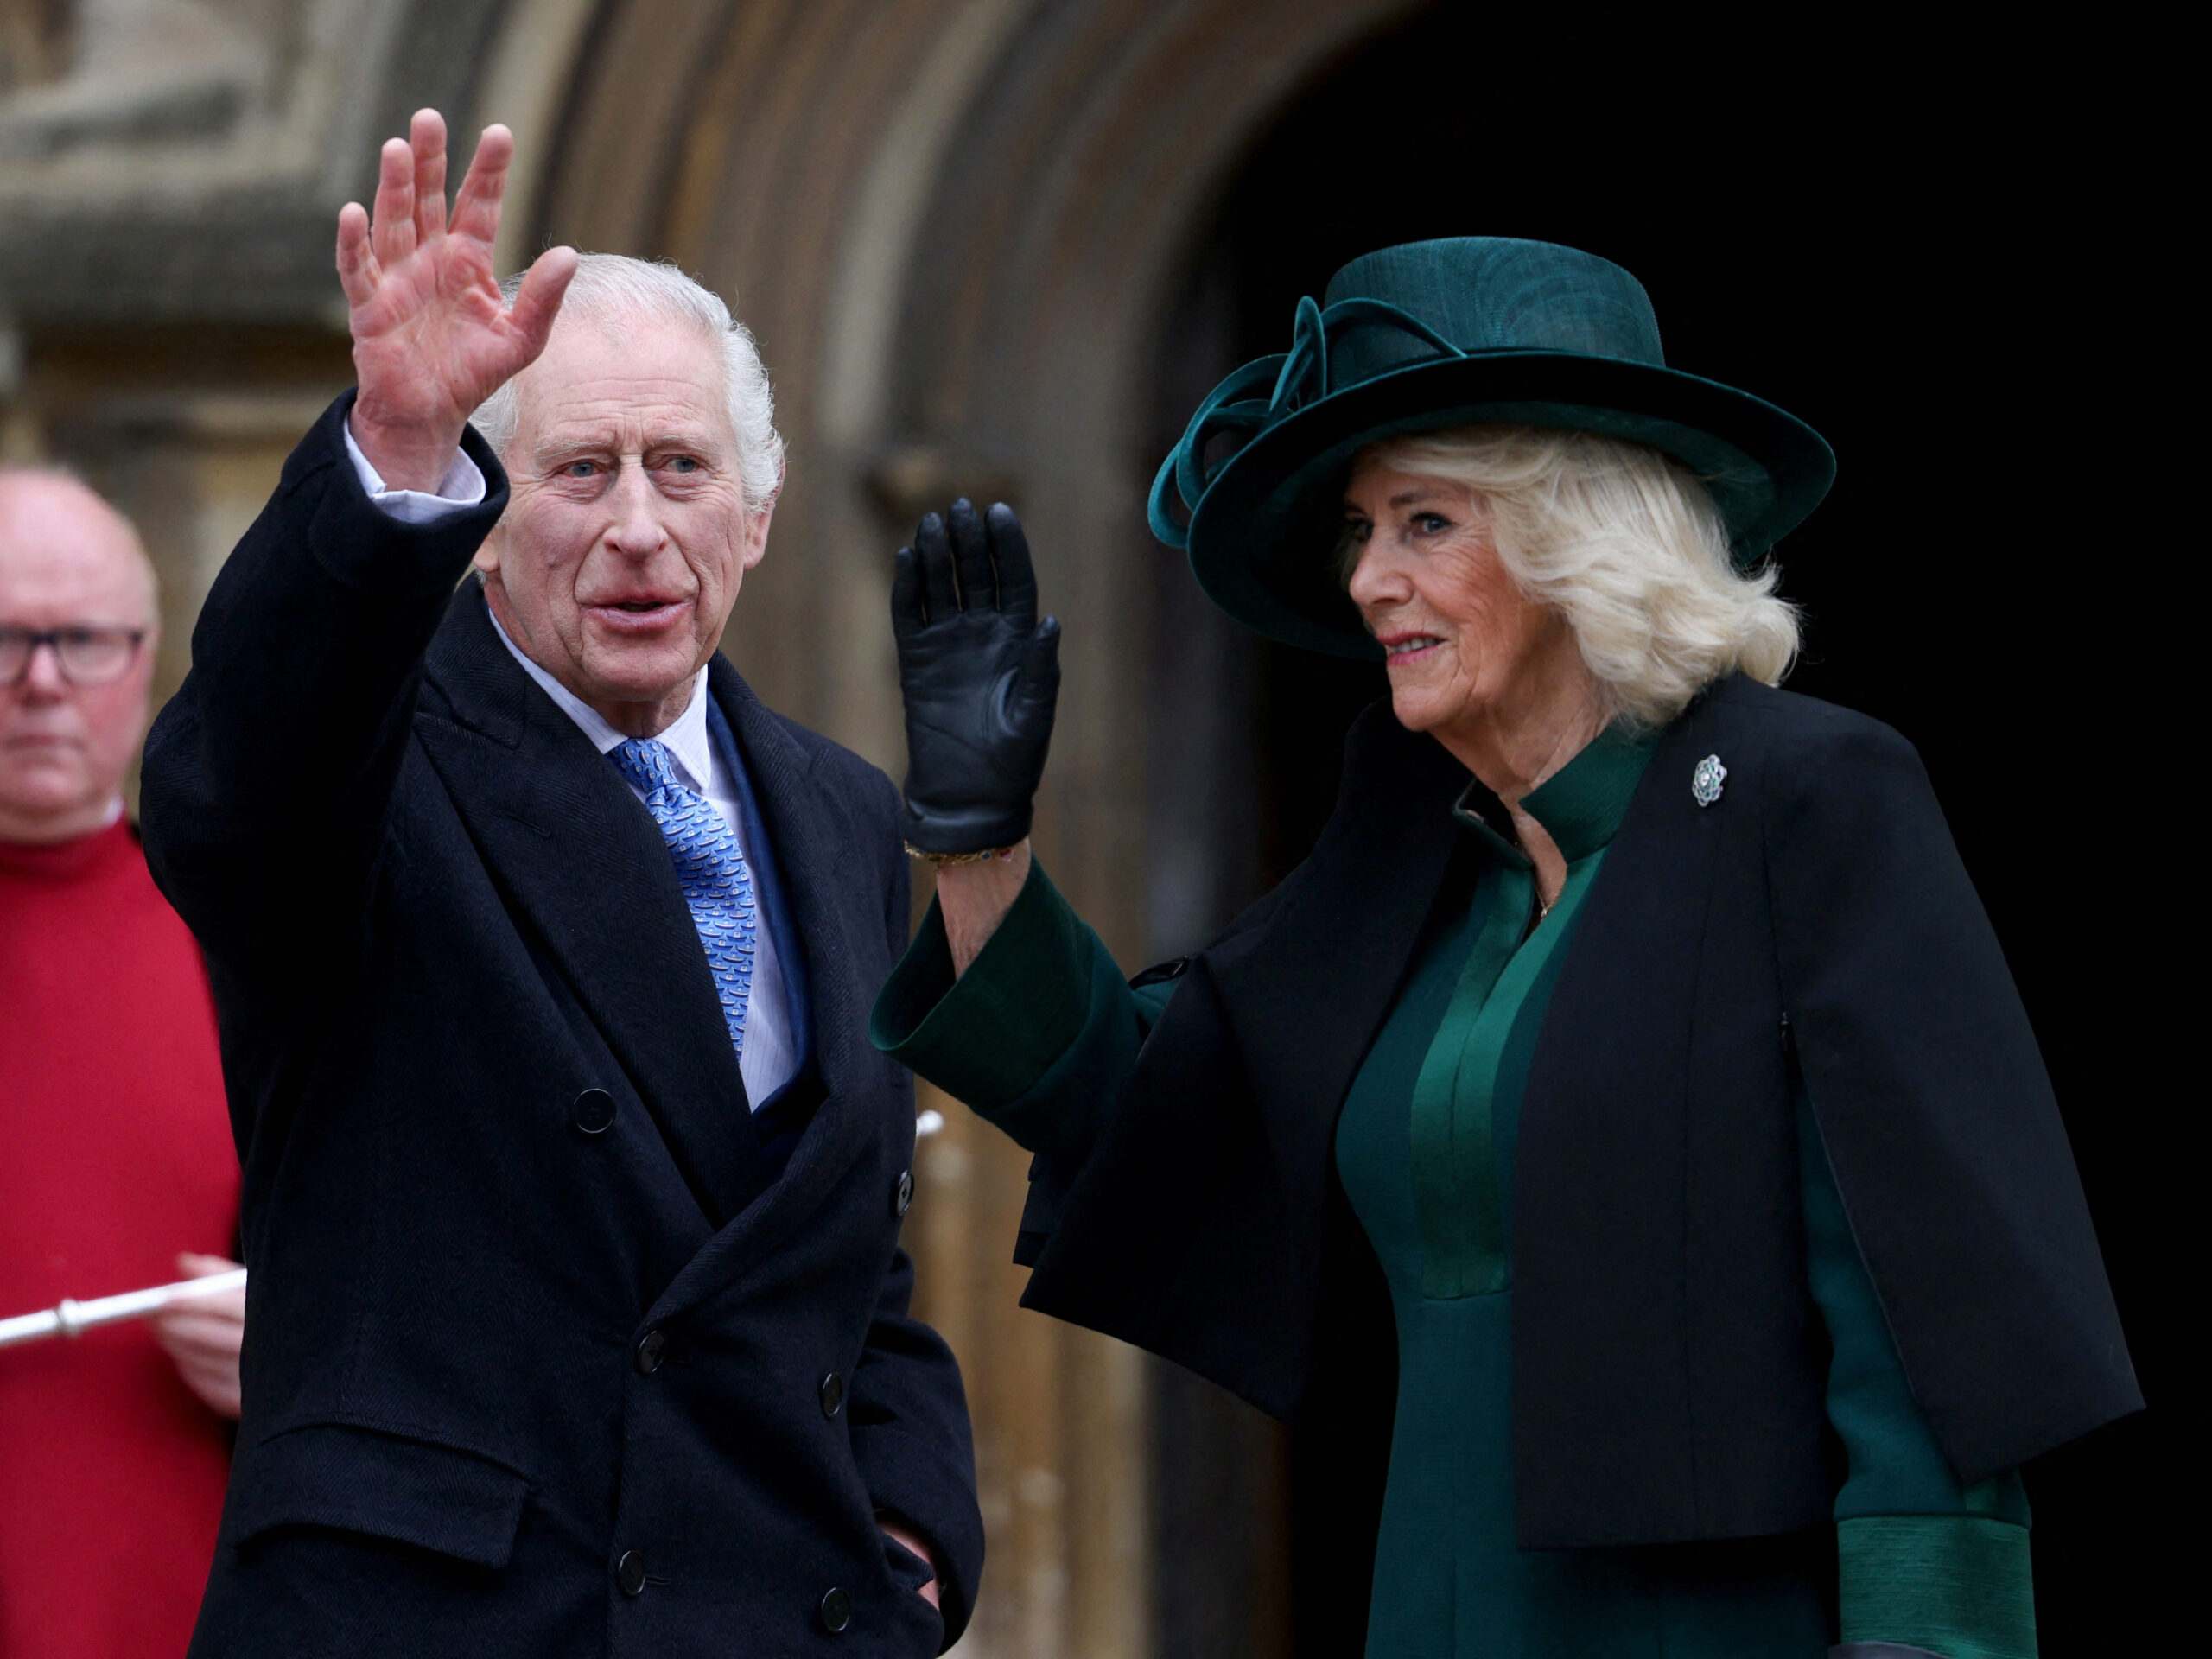 Britain's King Charles III (center), next to Queen Camilla, waves as they arrive at St. George's Chapel, Windsor Castle, on March 31.